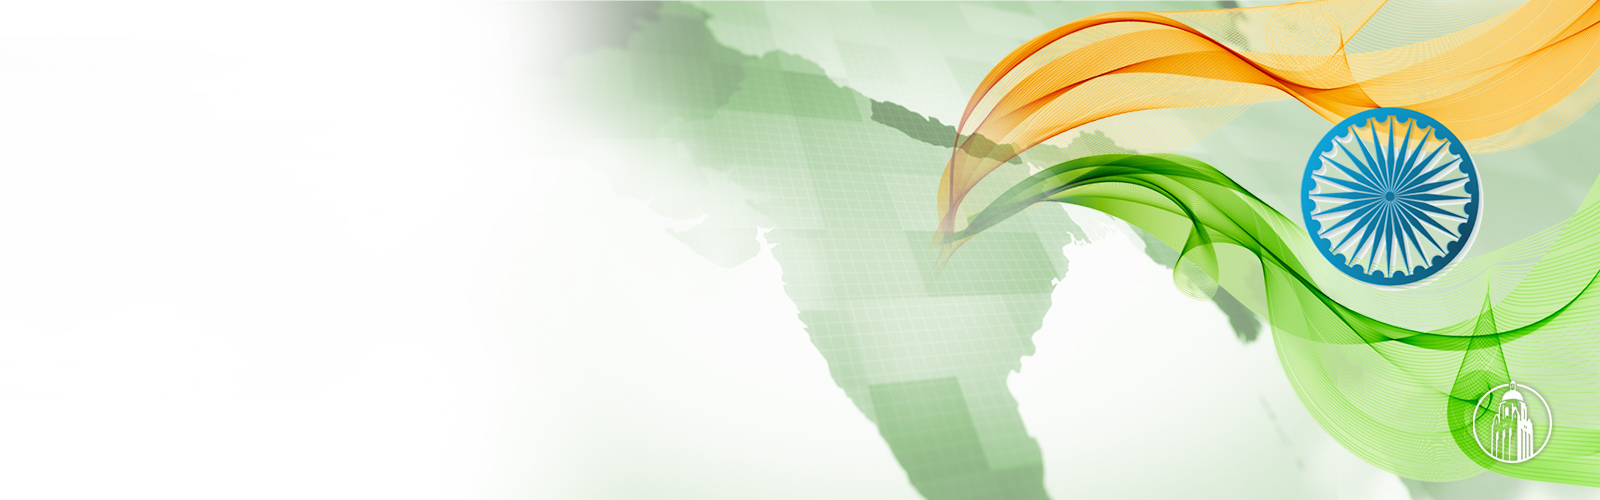 Strengthening US-India Relations | A Hoover Institution Project